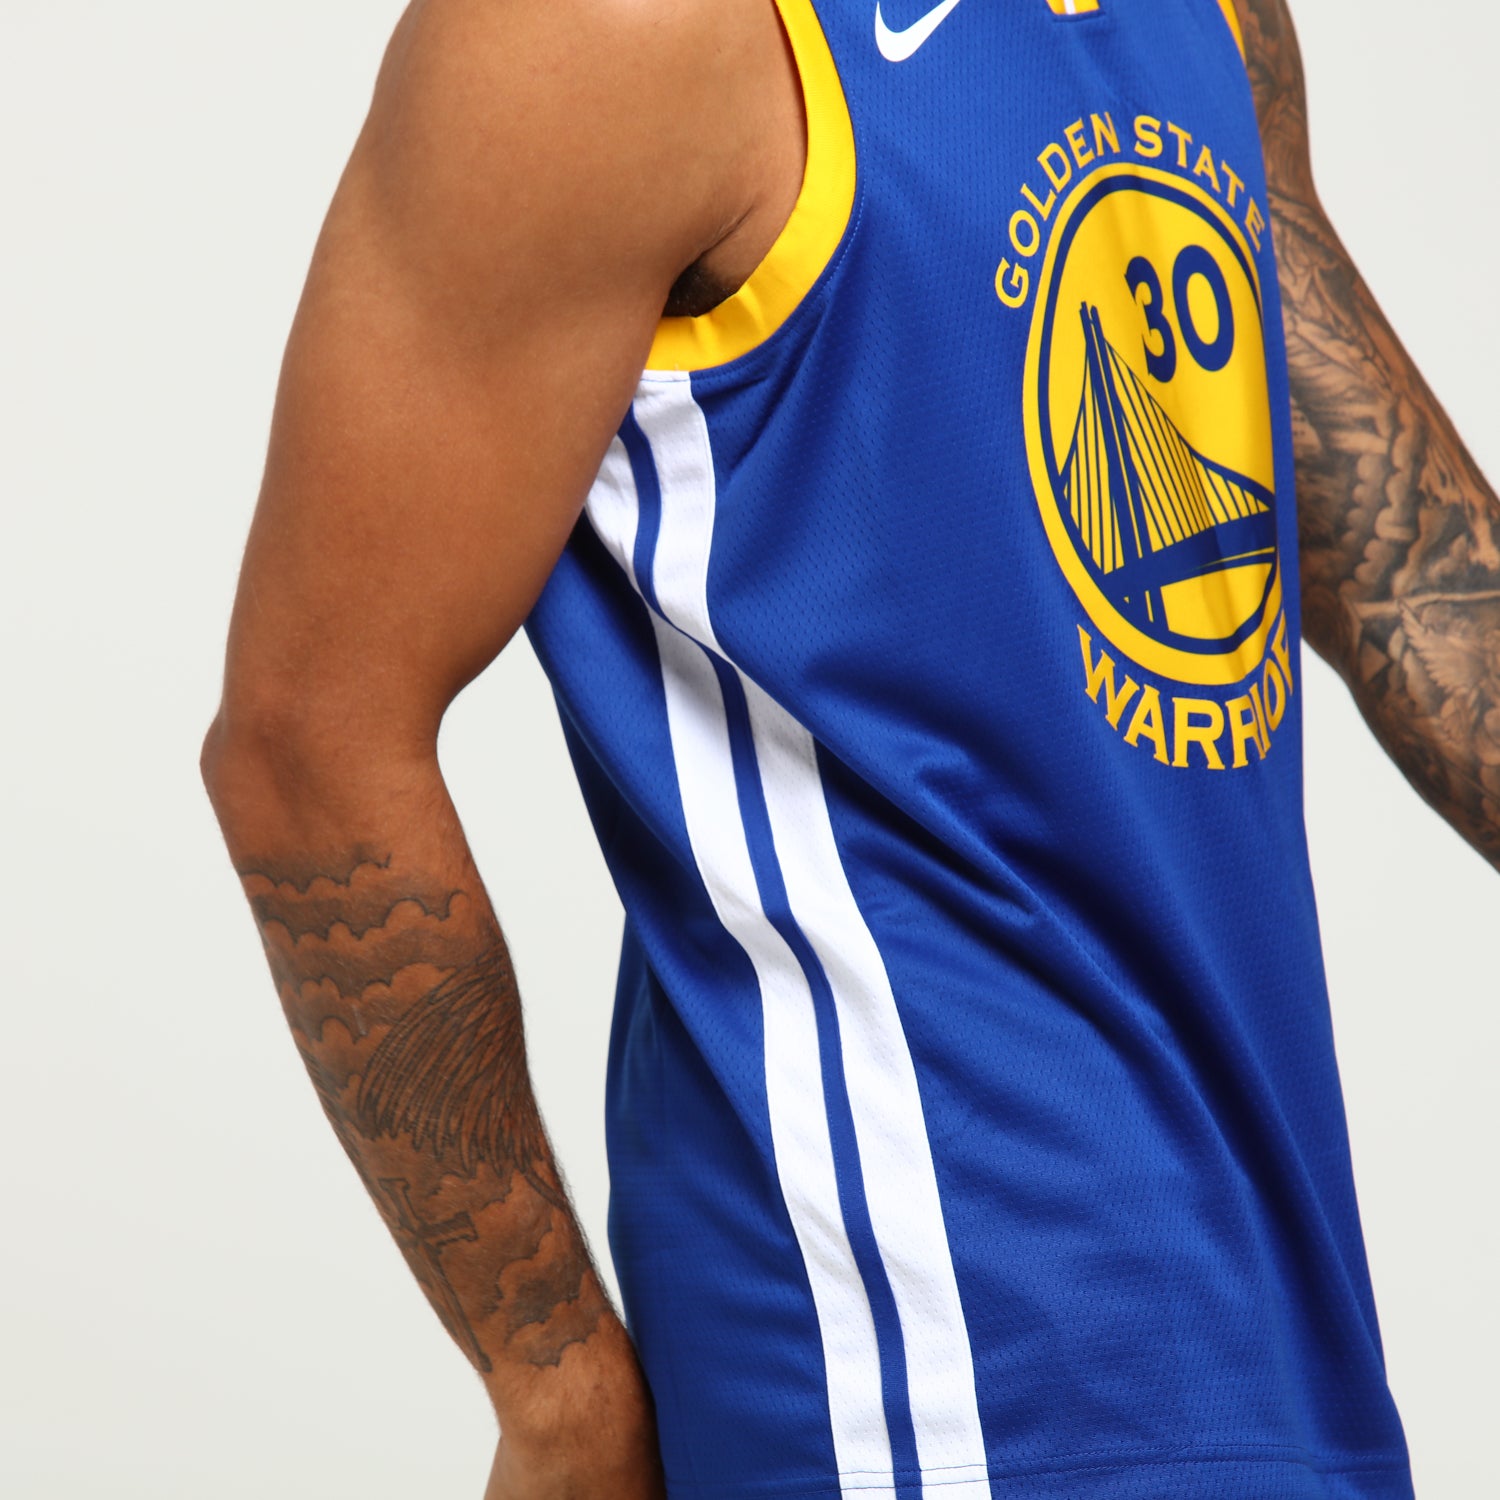 stephen curry jersey real